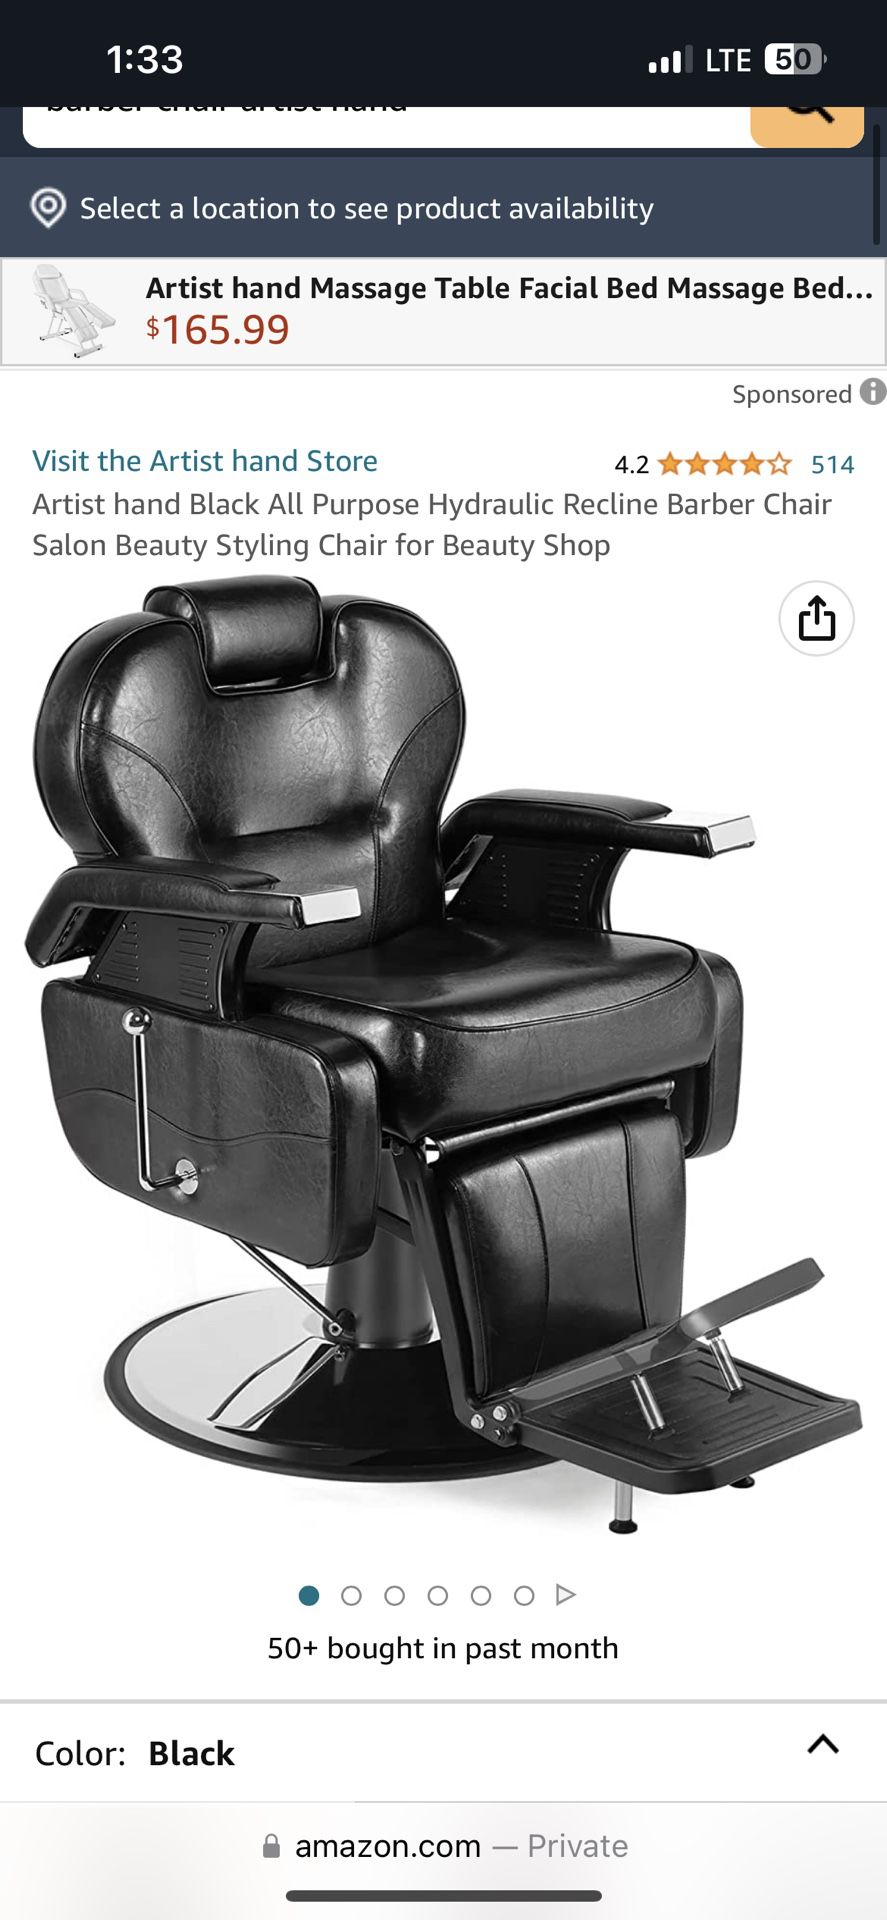 Artist hand Black All Purpose Hydraulic Recline Barber Chair Salon Beauty Styling Chair for Beauty Shop